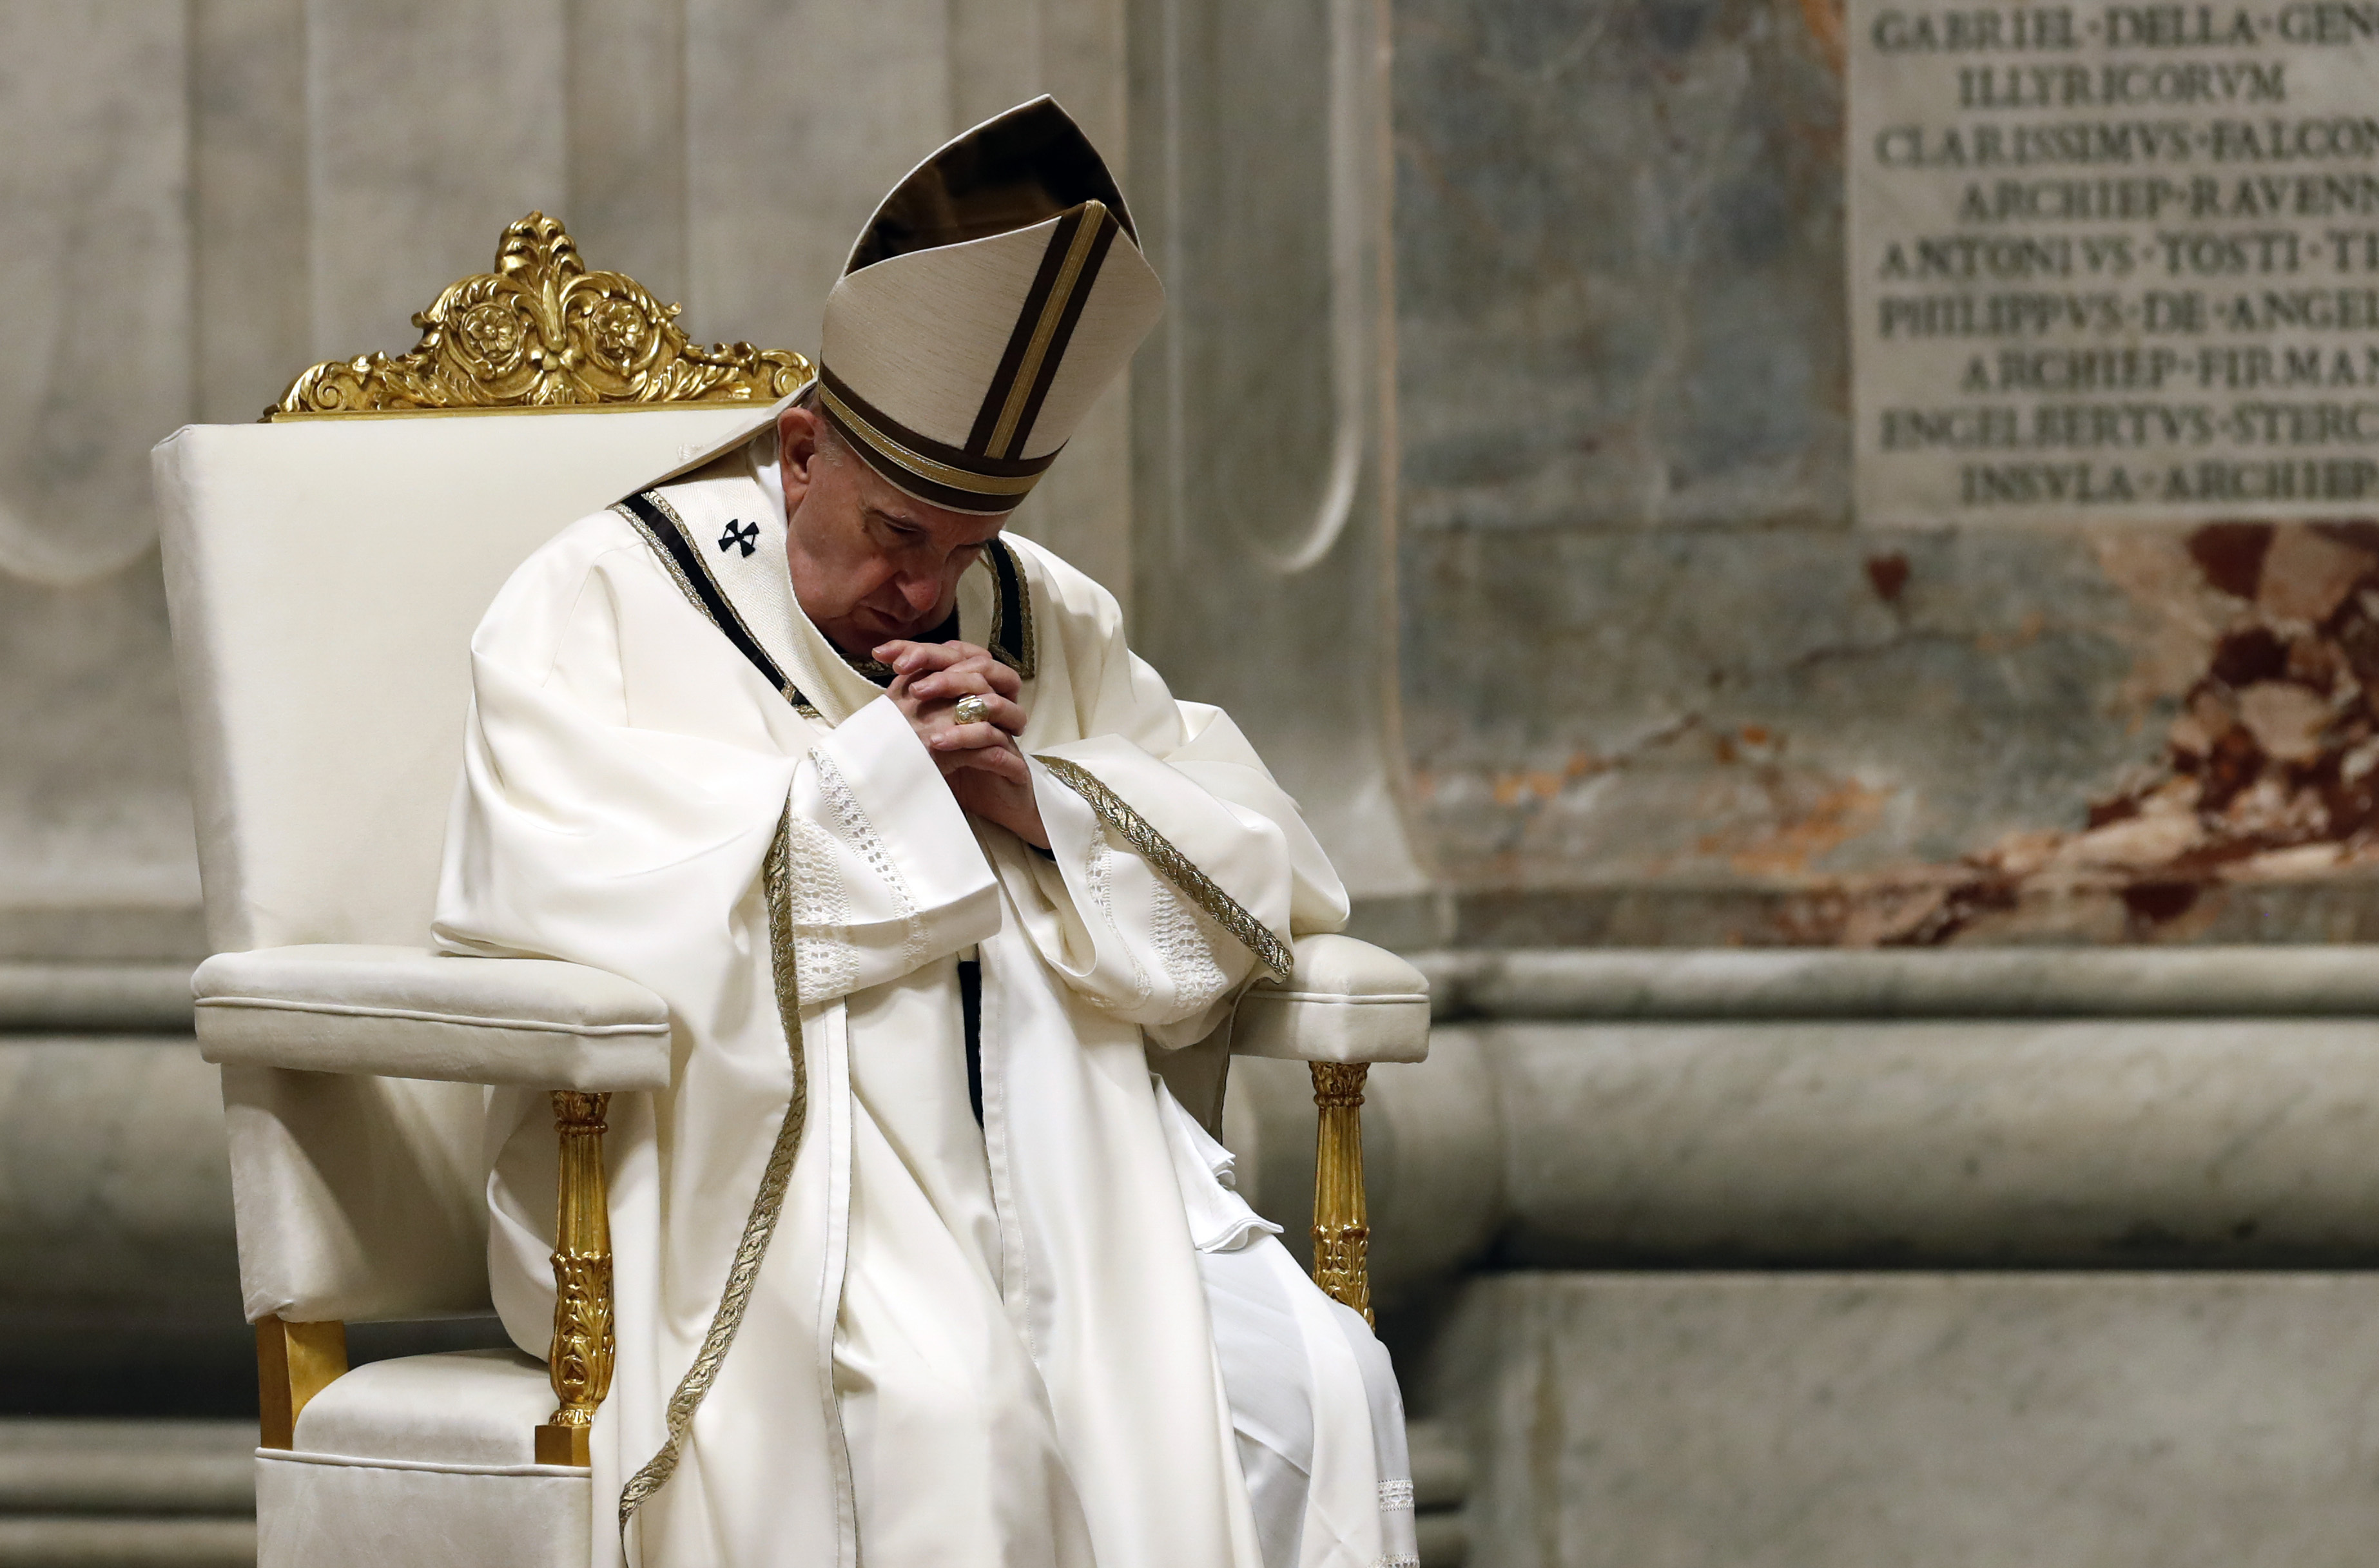 Pope Francis presides over an Easter vigil in St. Peter's Basilica in the Vatican on April 11.